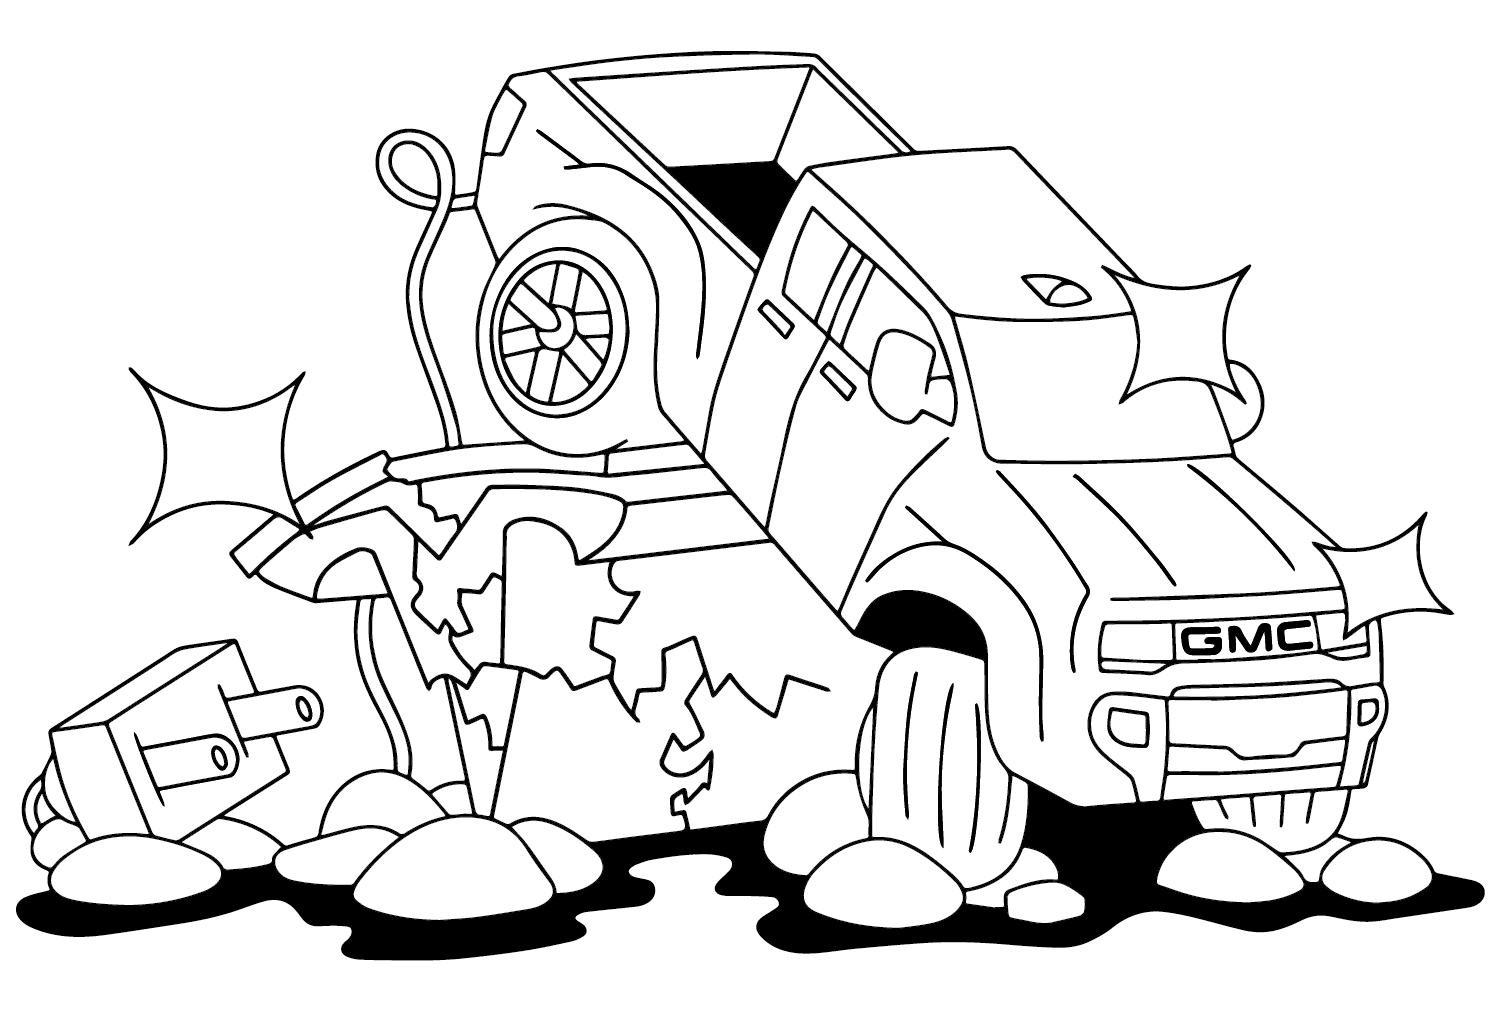 GMC Car Coloring Page from GMC